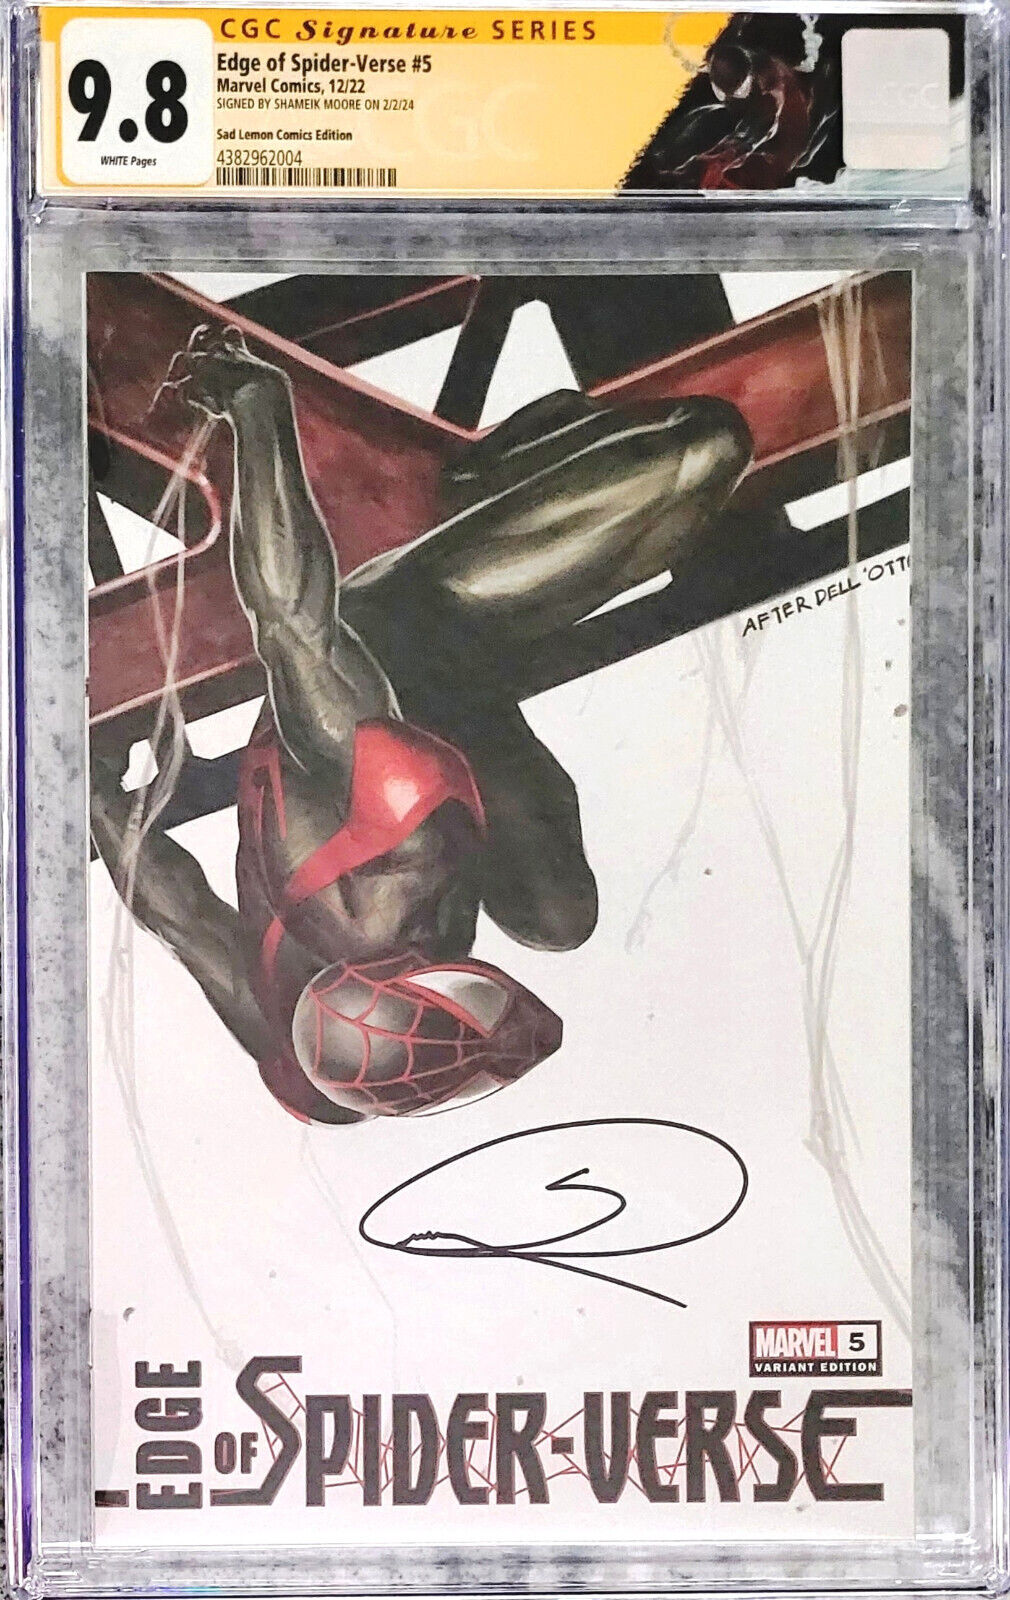 RARE CGC 9.8 Edge of Spider-Verse #5 Signed by Shameik Moore aka Miles Morales